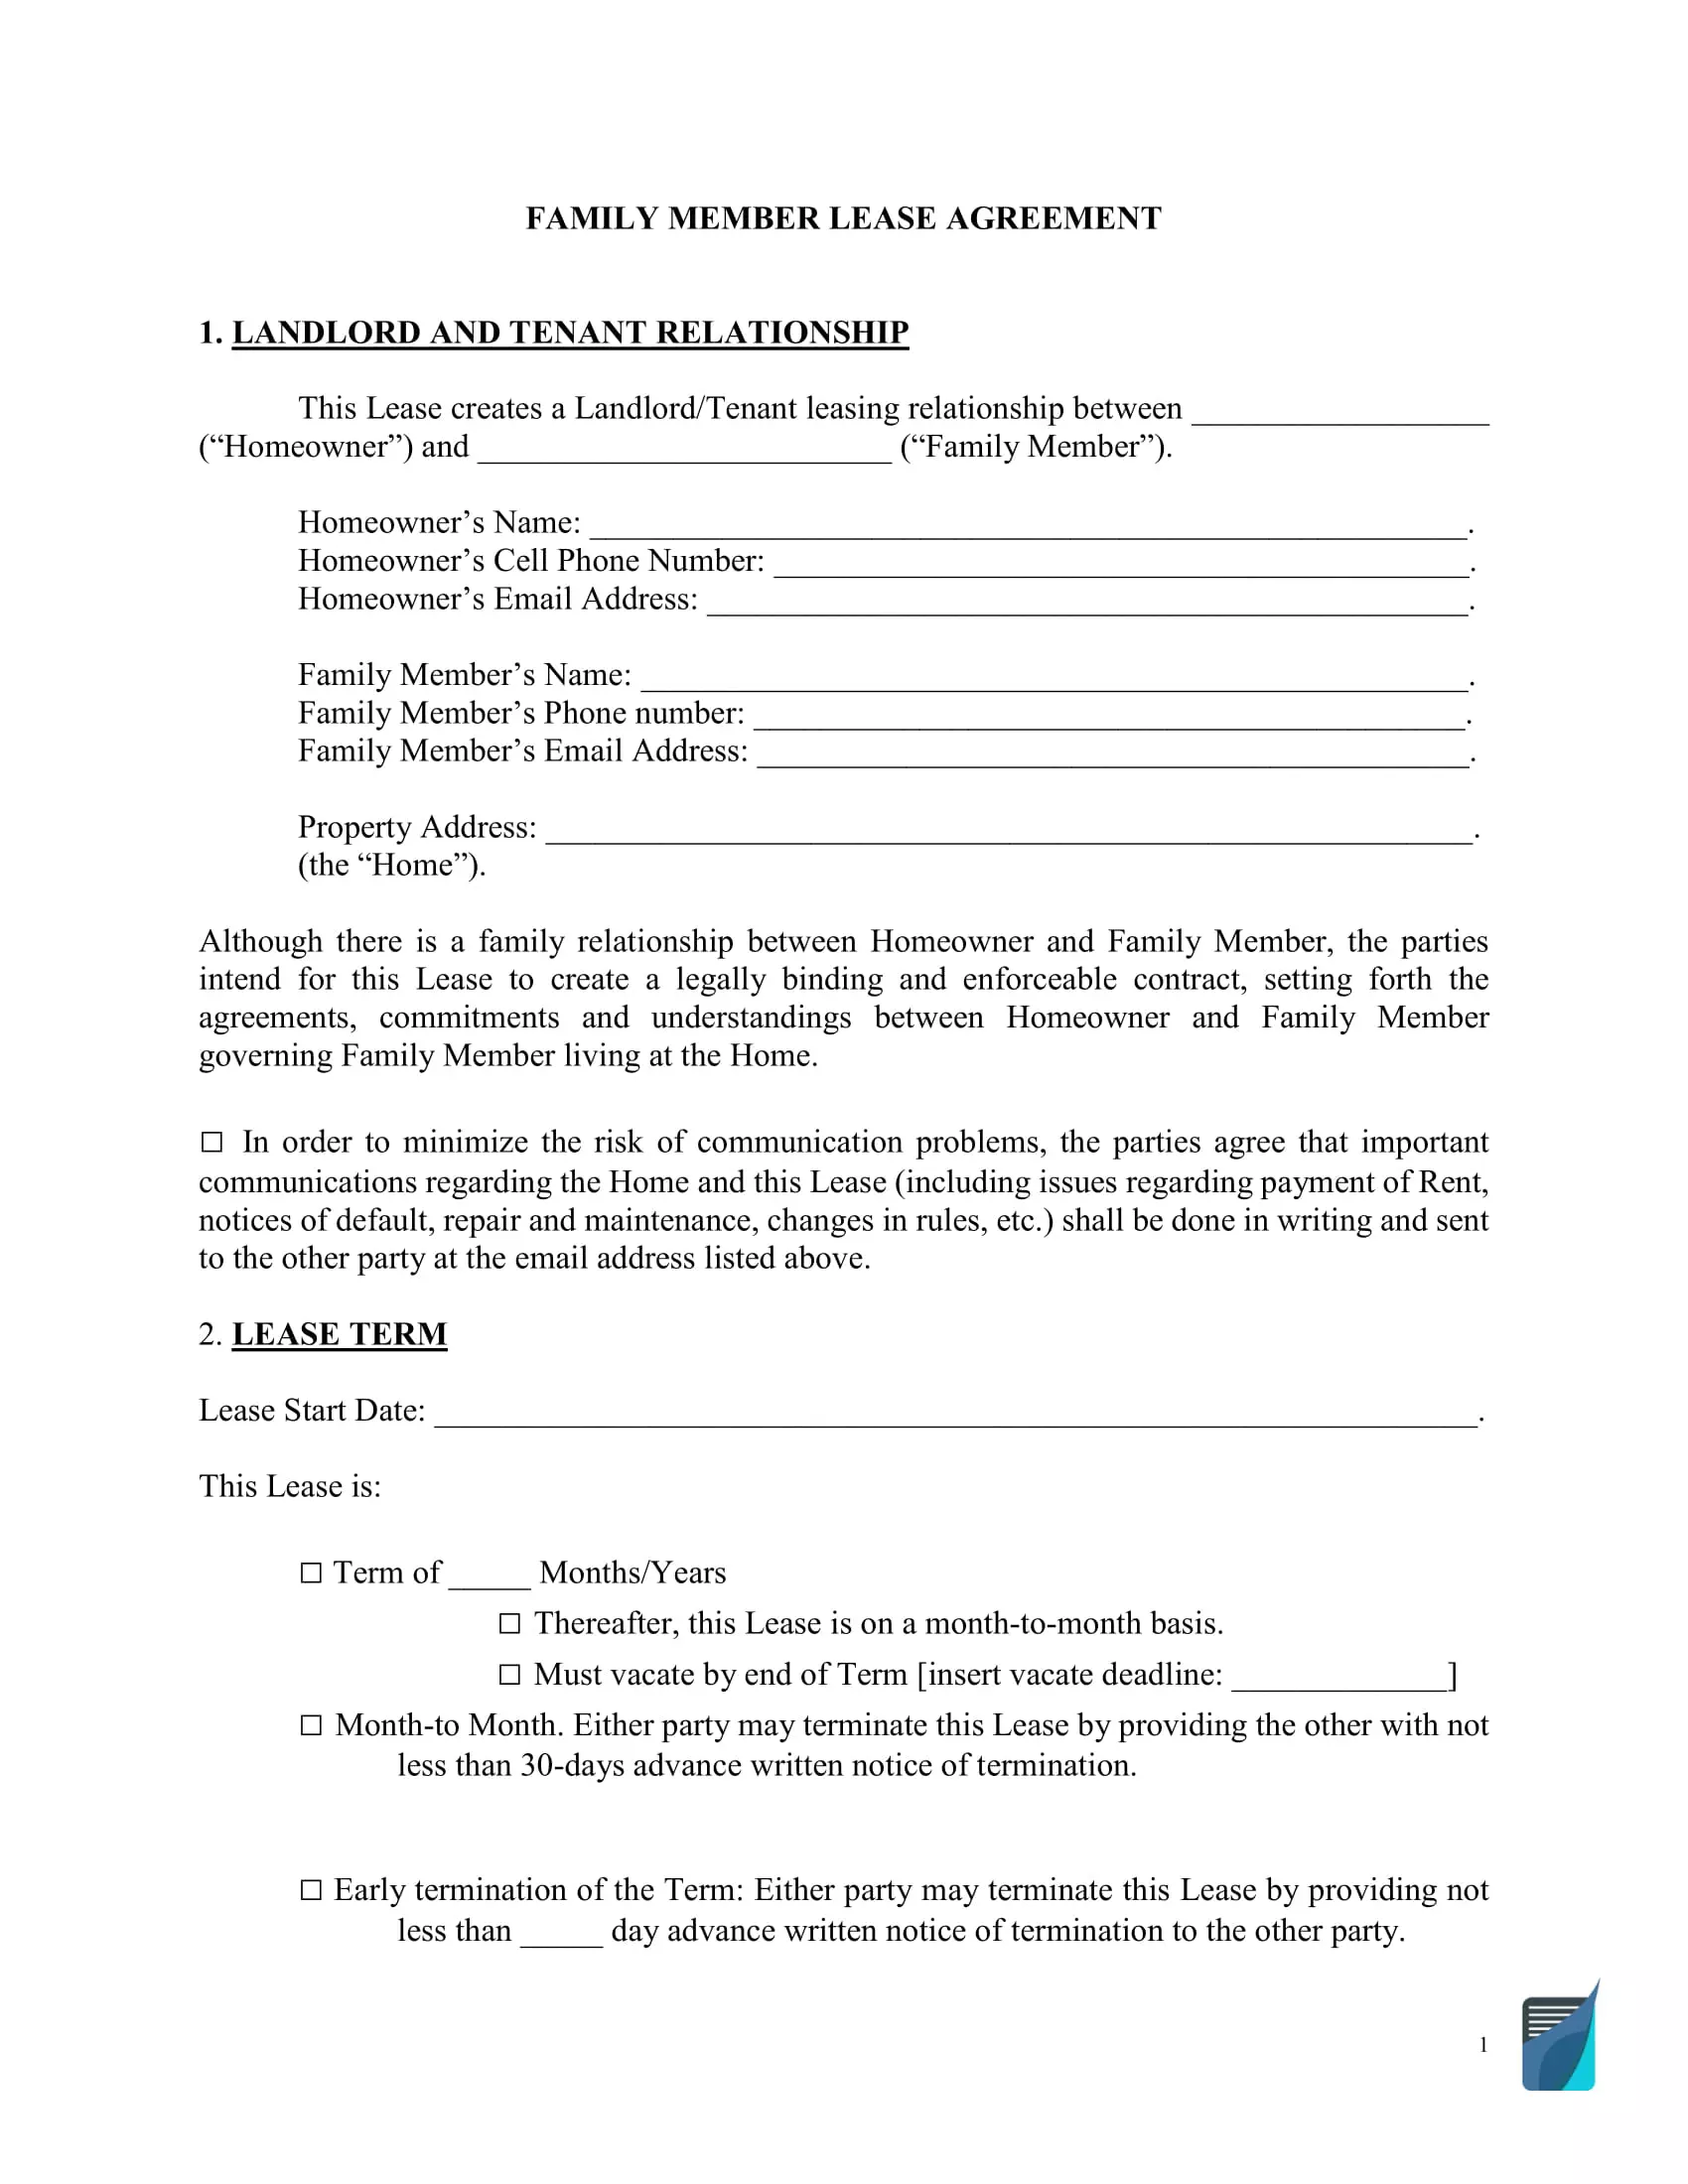 Family Rental Agreement Template ⇒ Parent-Child Lease Form Intended For corporate housing lease agreement template